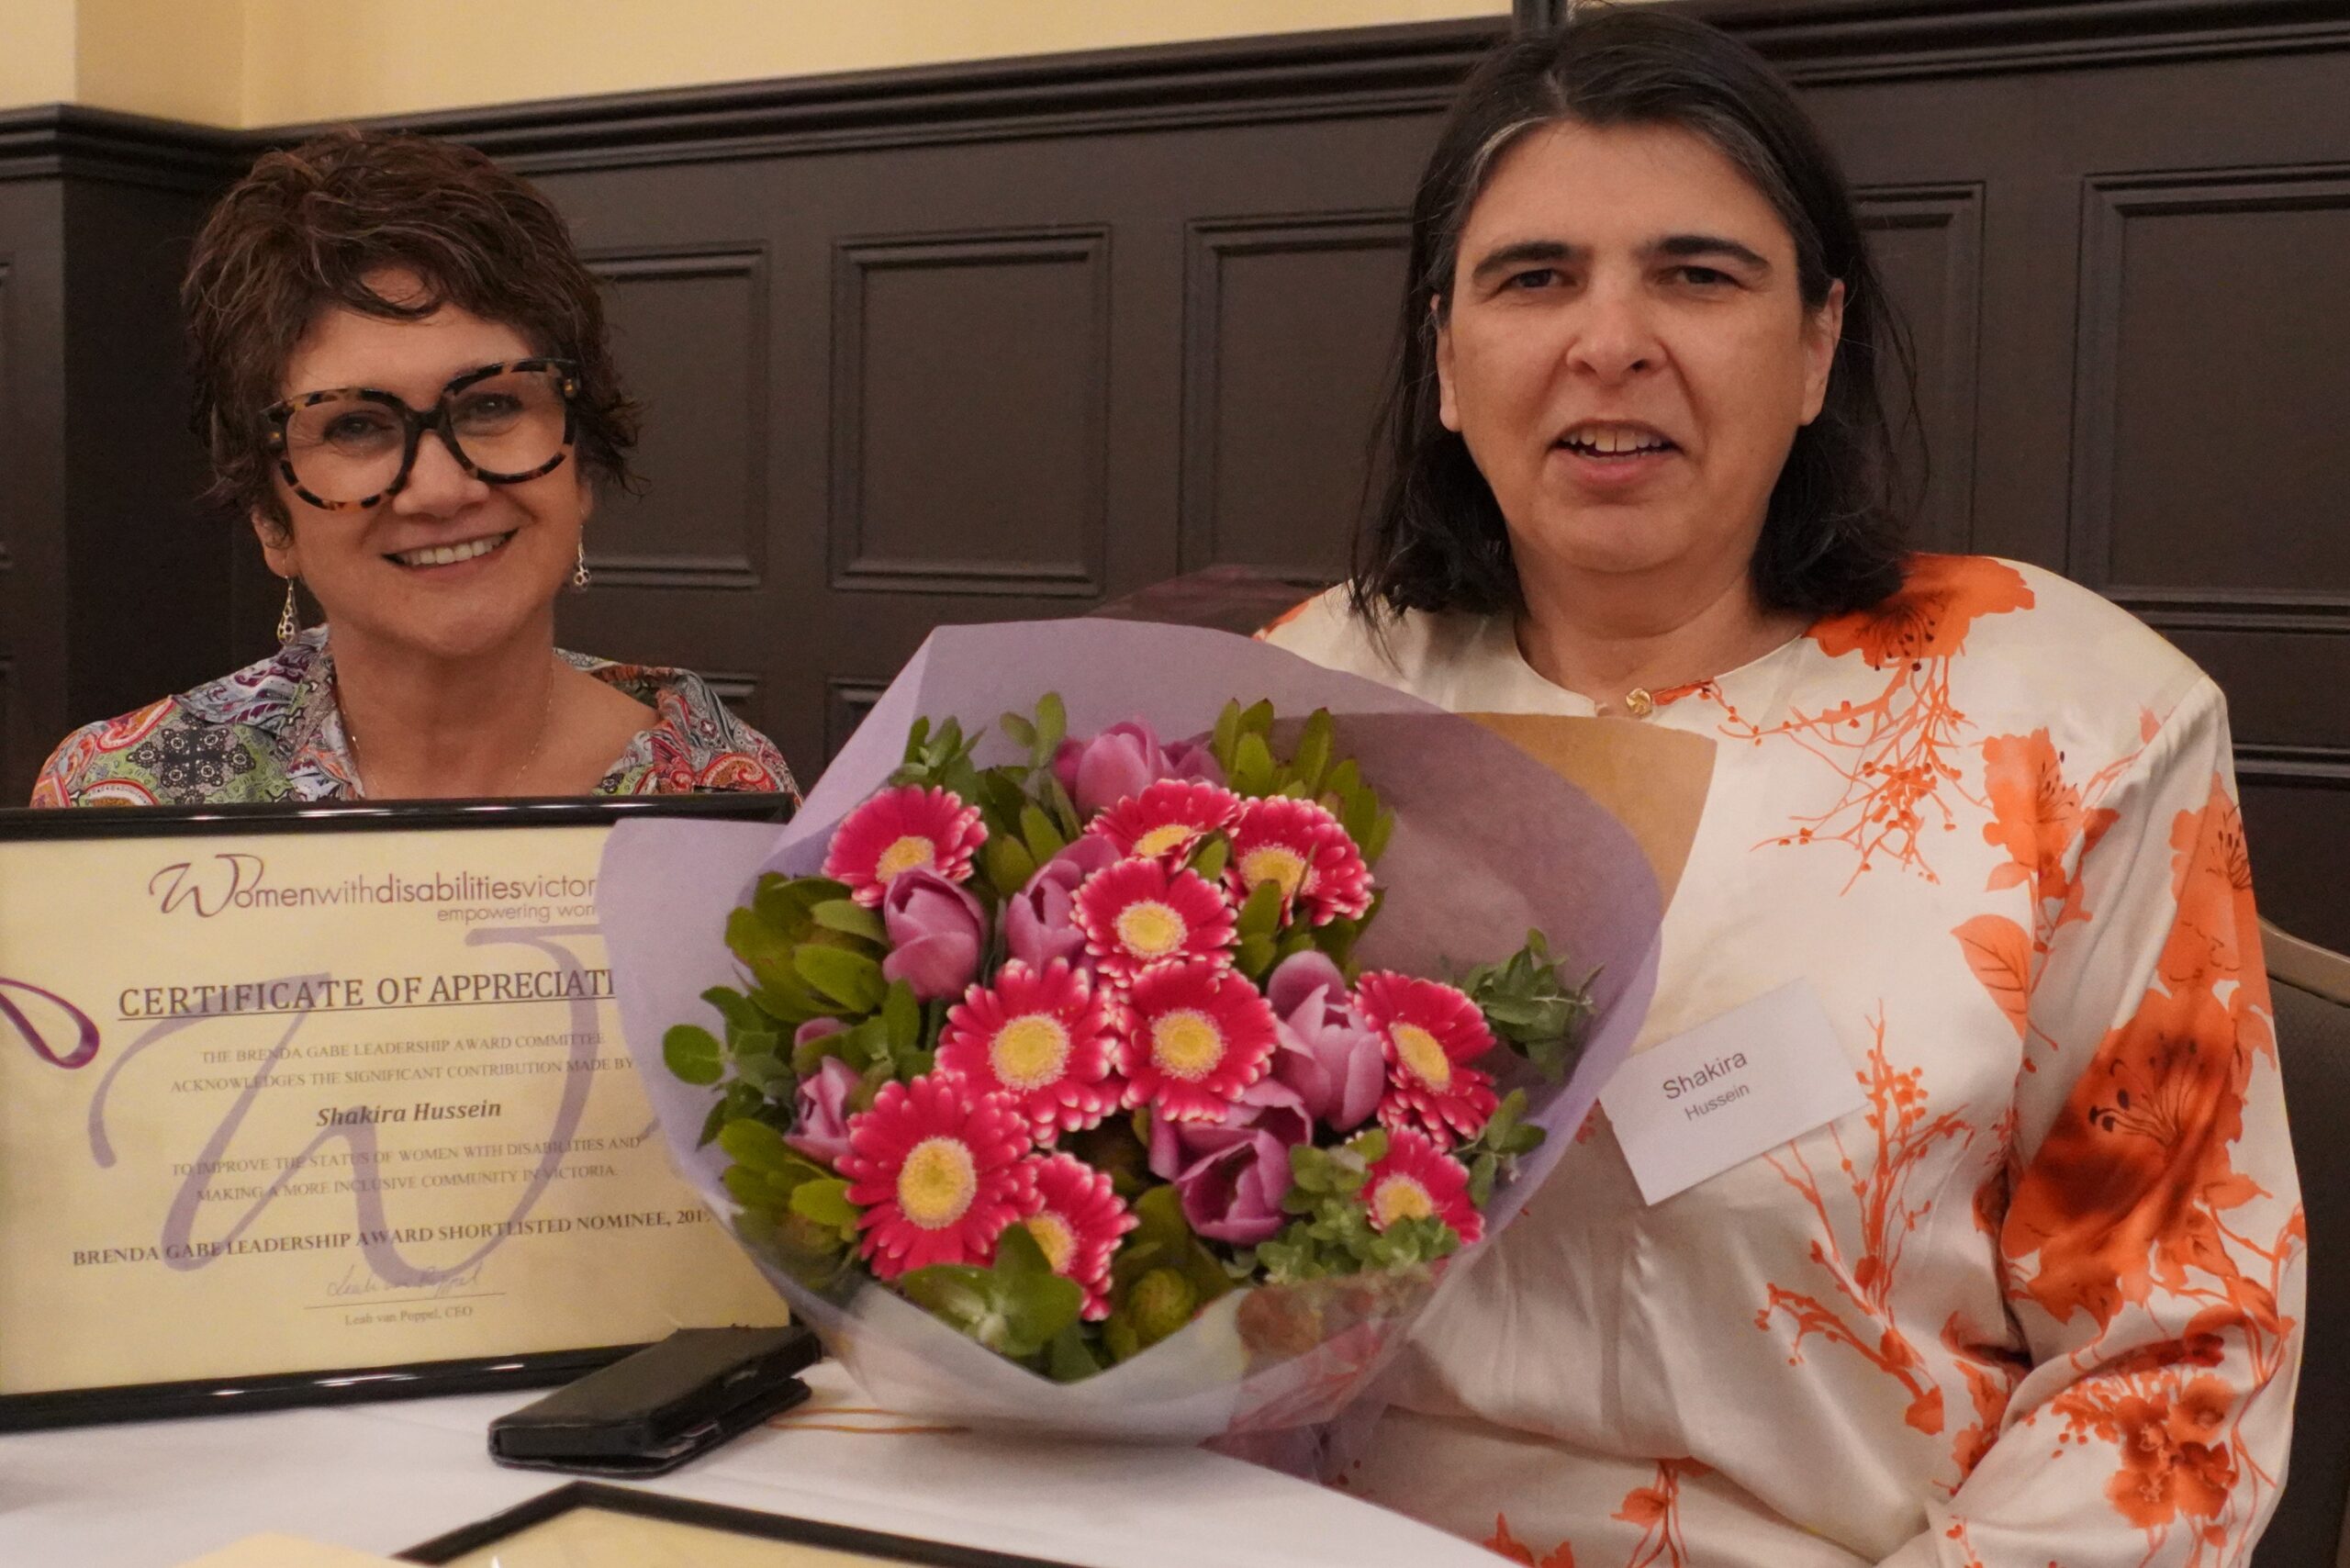 Two women sitting at a table. Shakira is on the left with a bunch of flowers in front of her. The lady sitting next to her is smiling and holding Shakira's certificate to the camera.